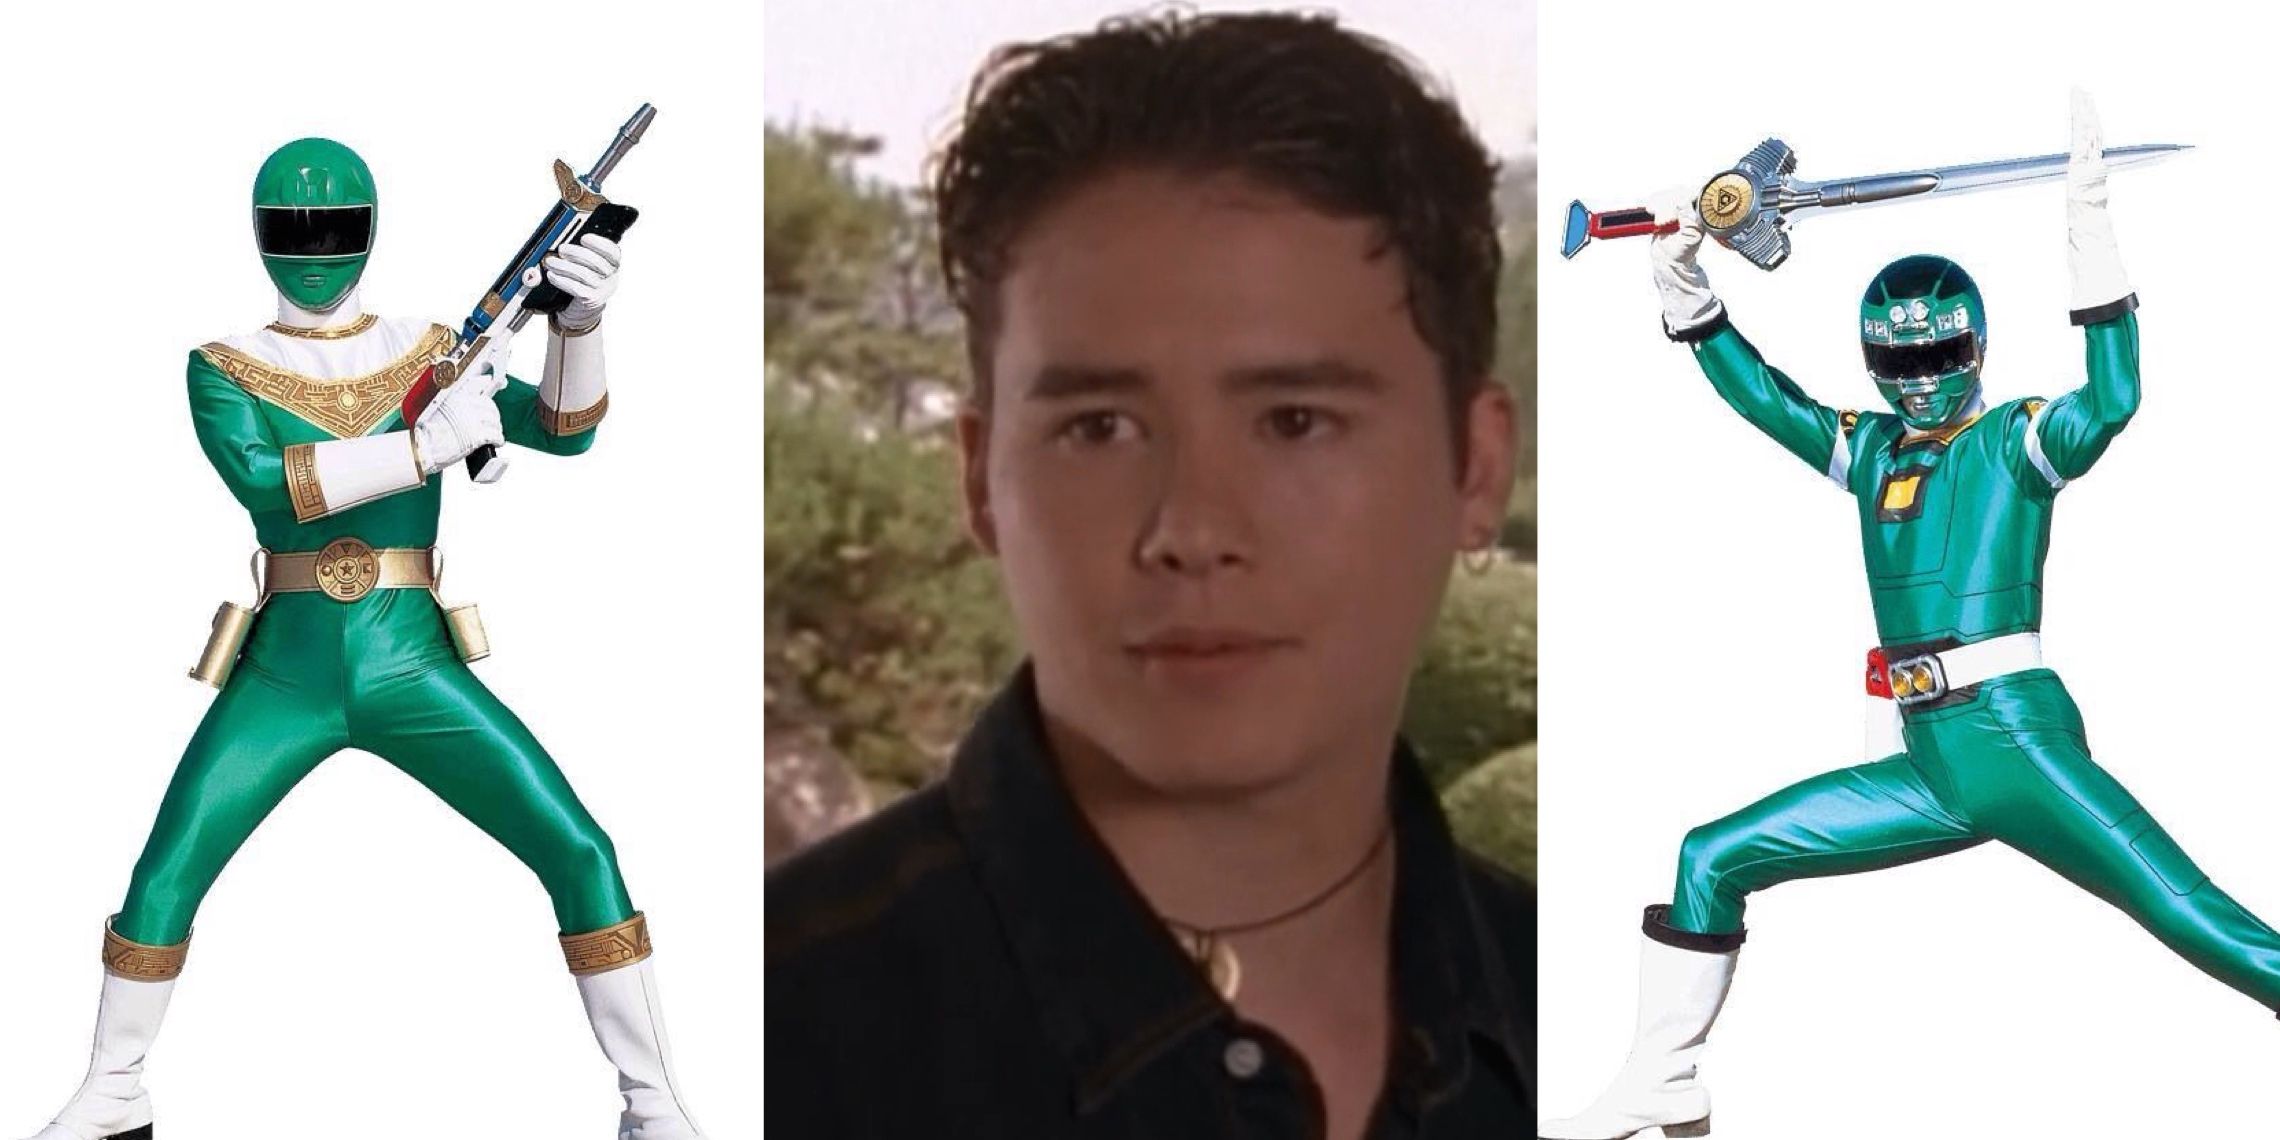 Adam as the Green Ranger in Power Rangers Zeo and Turbo